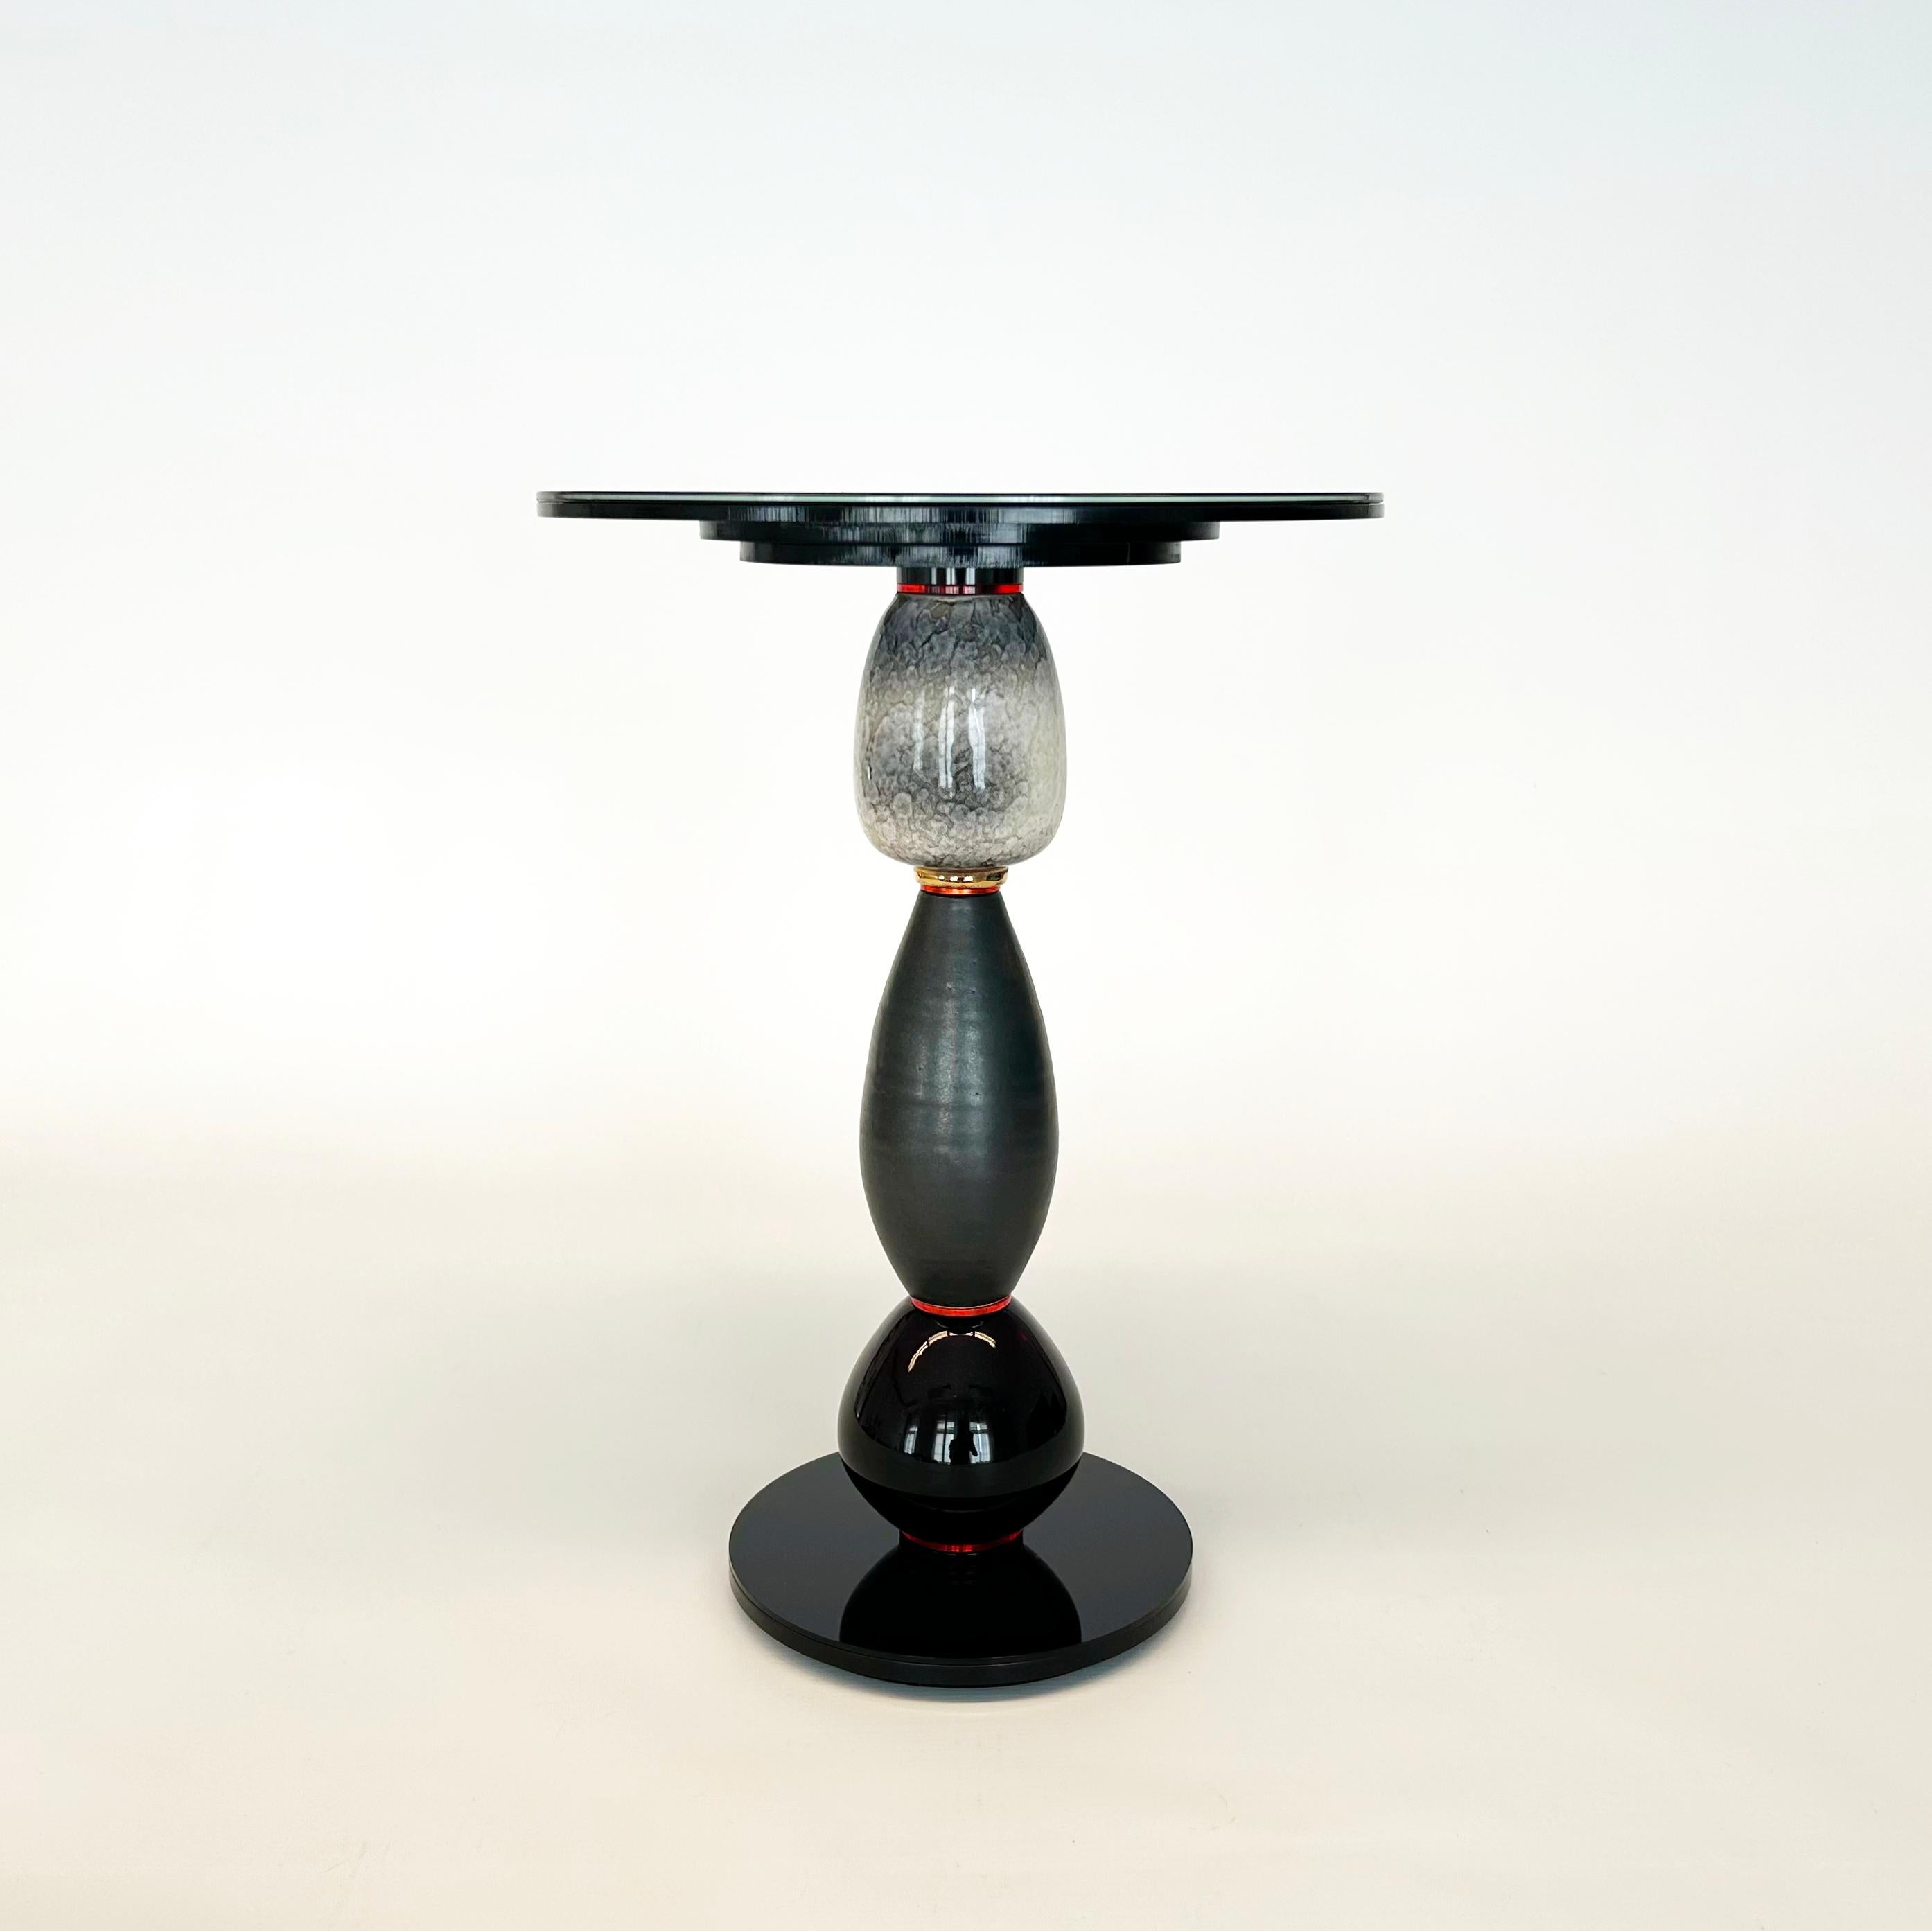 Designer and Artis Andreas Berlin created a collection of extraordinary side tables. This tables are sculptures and high end useful upcycling tables. The vases found in antiquarian stores become a new life as a segment of a sculpture. A clever